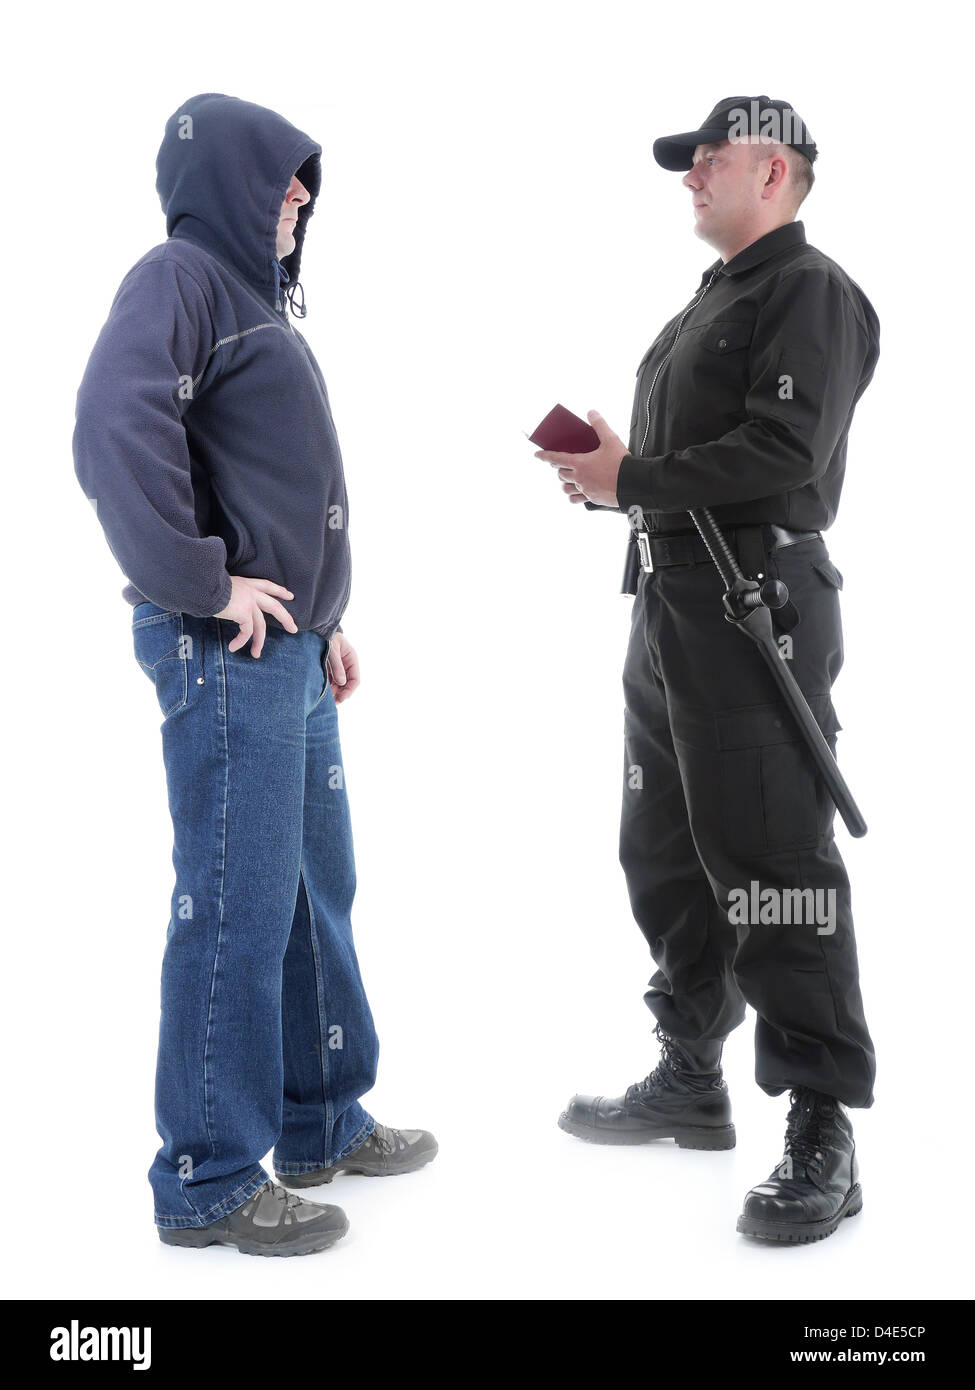 Policeman in black uniform checking ID of hooded suspect, shot on white Stock Photo